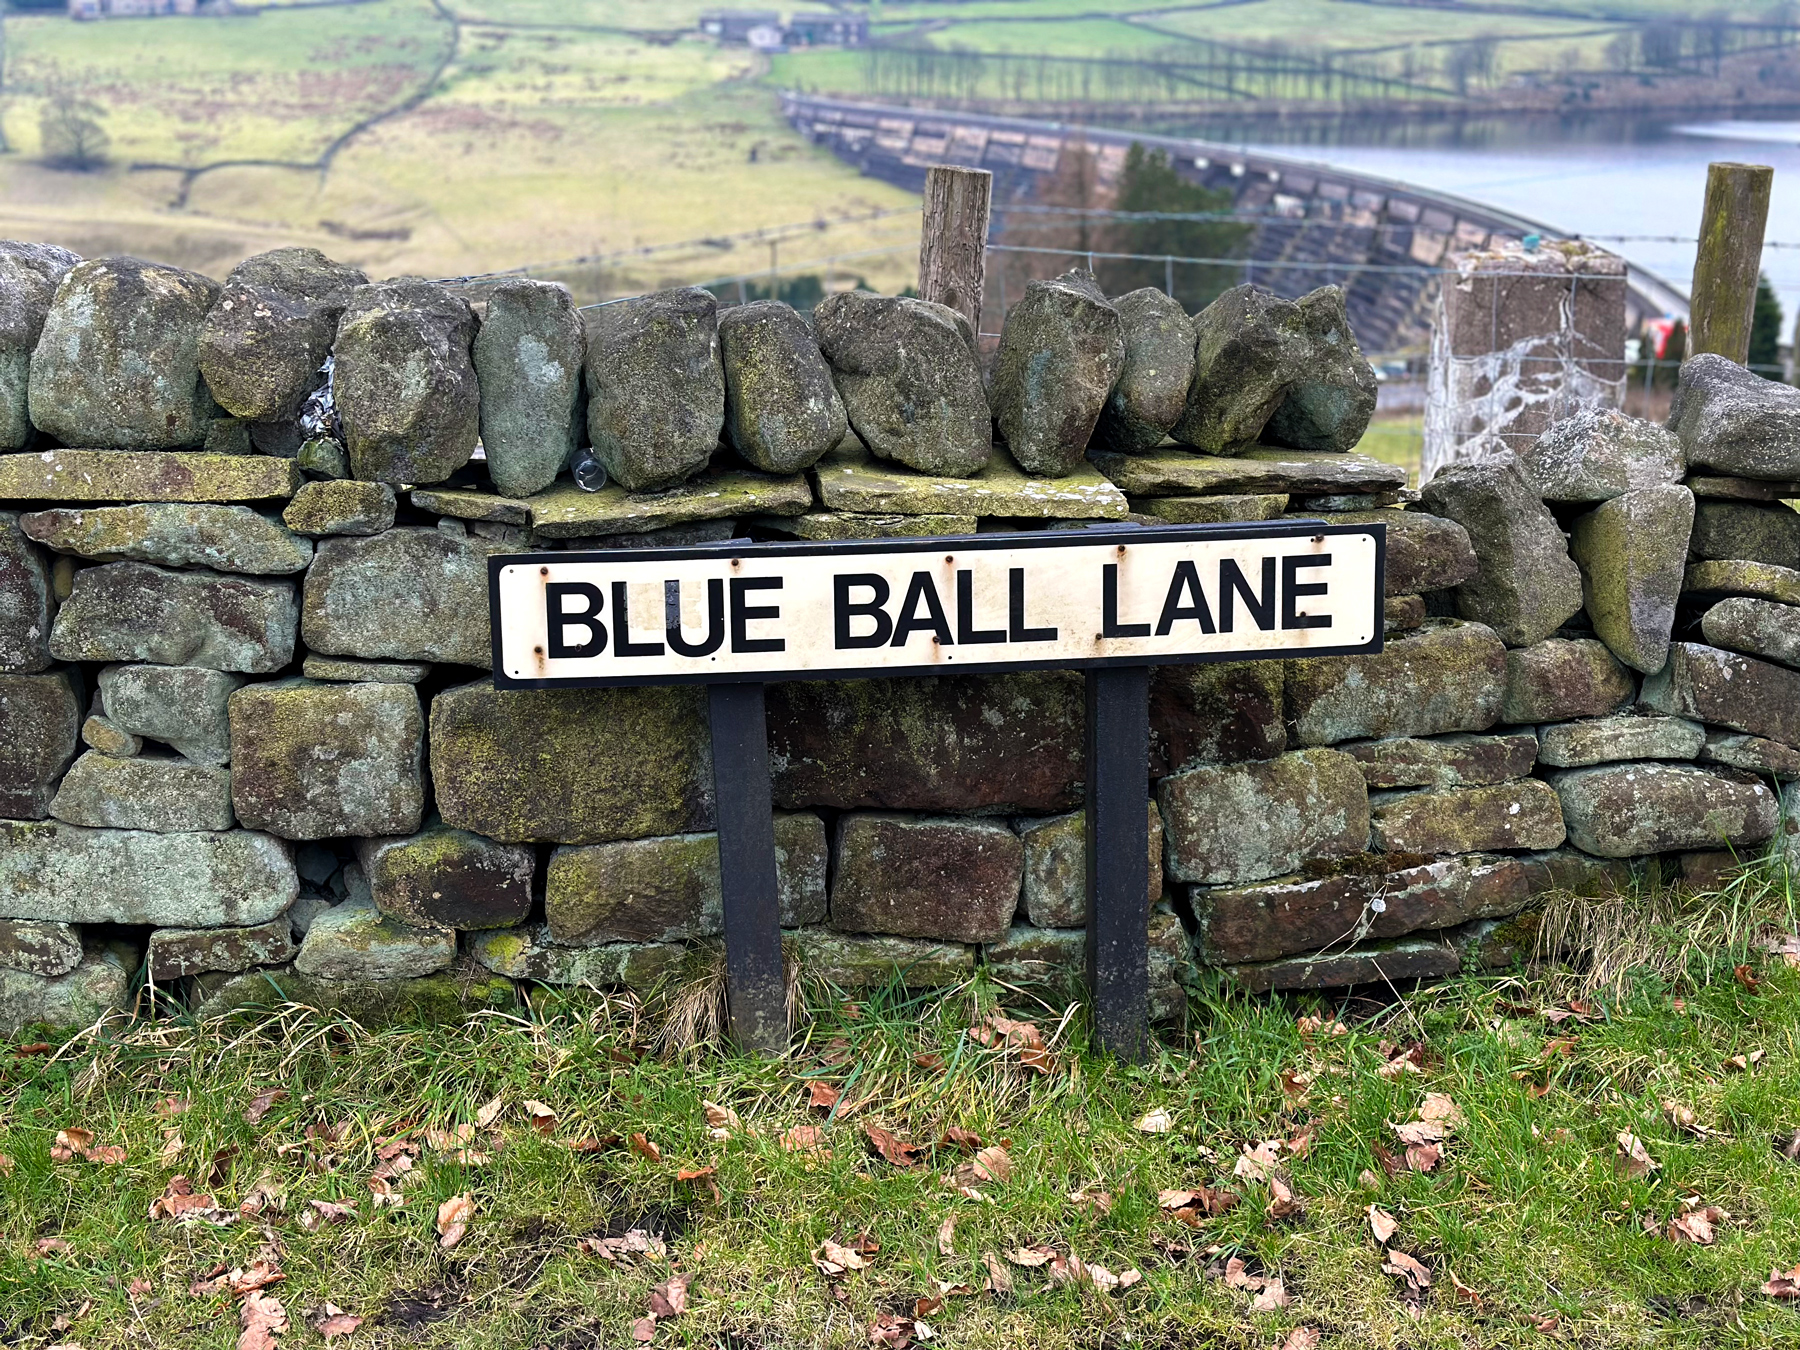 A road sign in the pretty Yorkshire countryside that reads 'Blue Ball Lane'